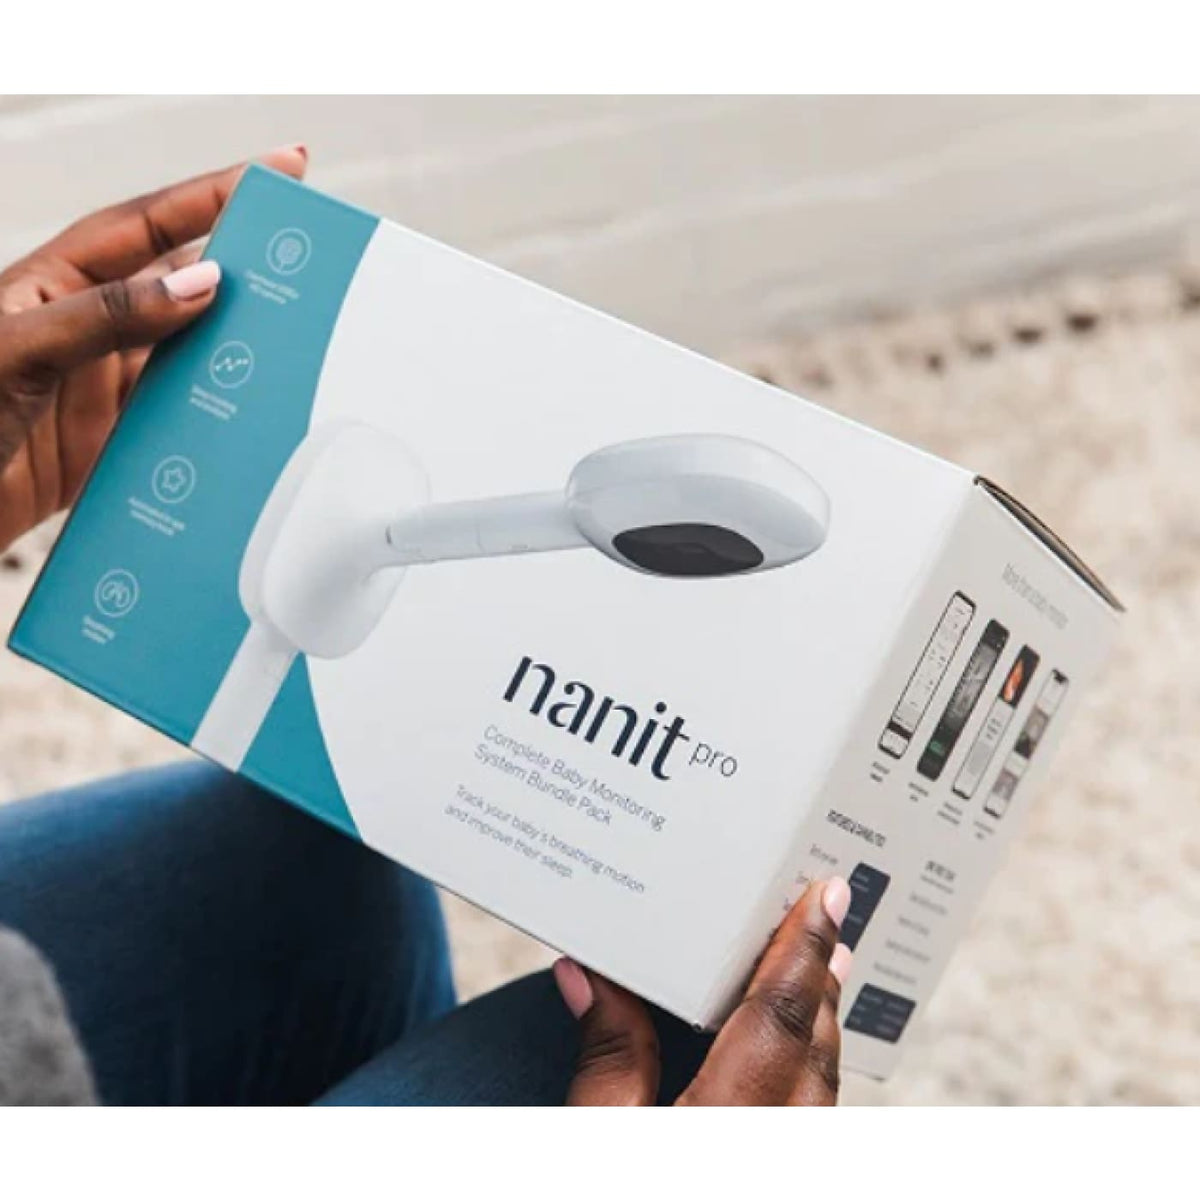 Nanit Pro Baby Monitor &amp; Breathing Monitor - HEALTH &amp; HOME SAFETY - BABY MONITORS